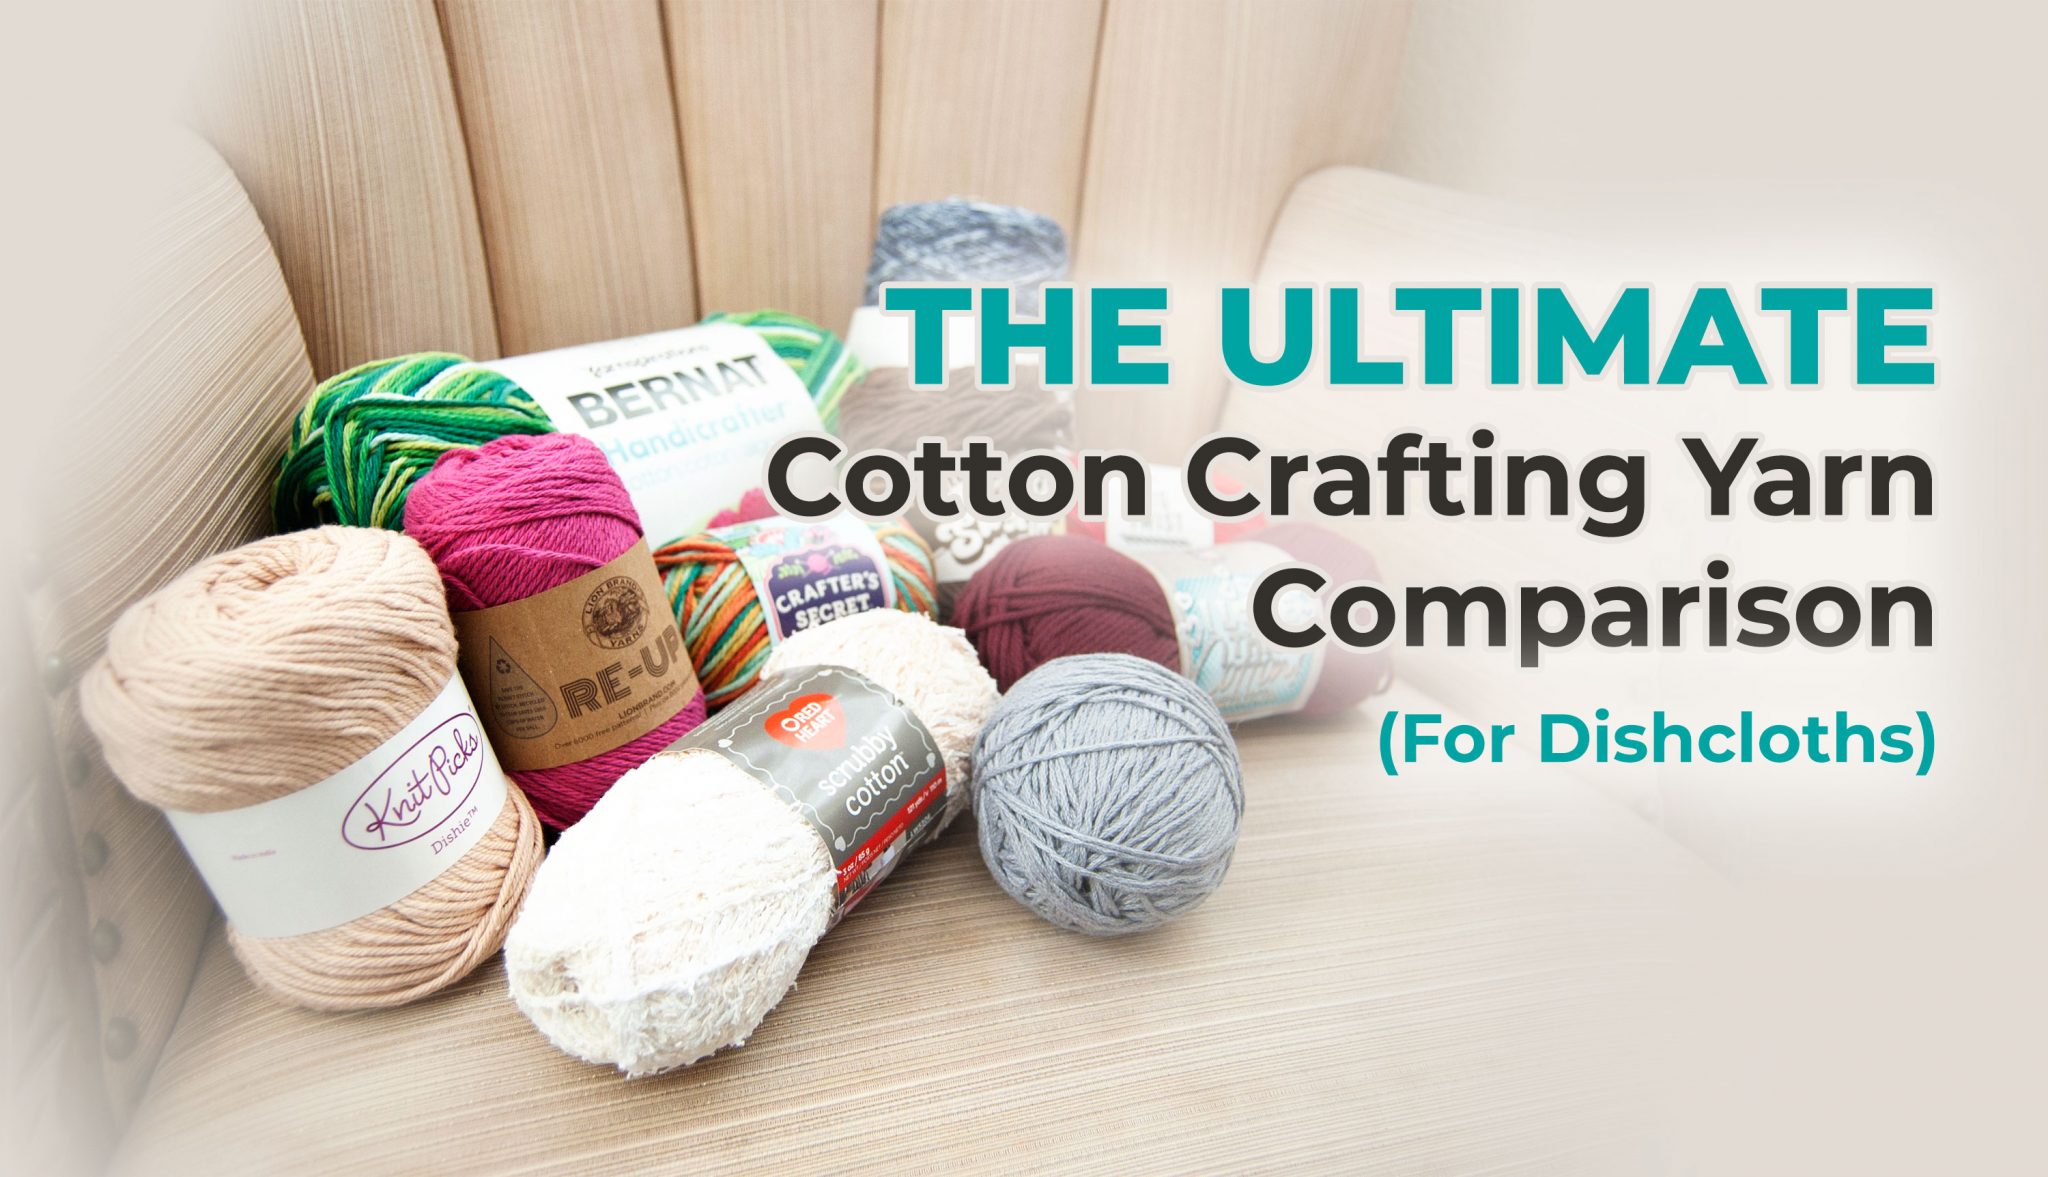 The Ultimate Cotton Crafting Yarn Comparison (for Dishcloths!) - Budget Yarn  Reviews